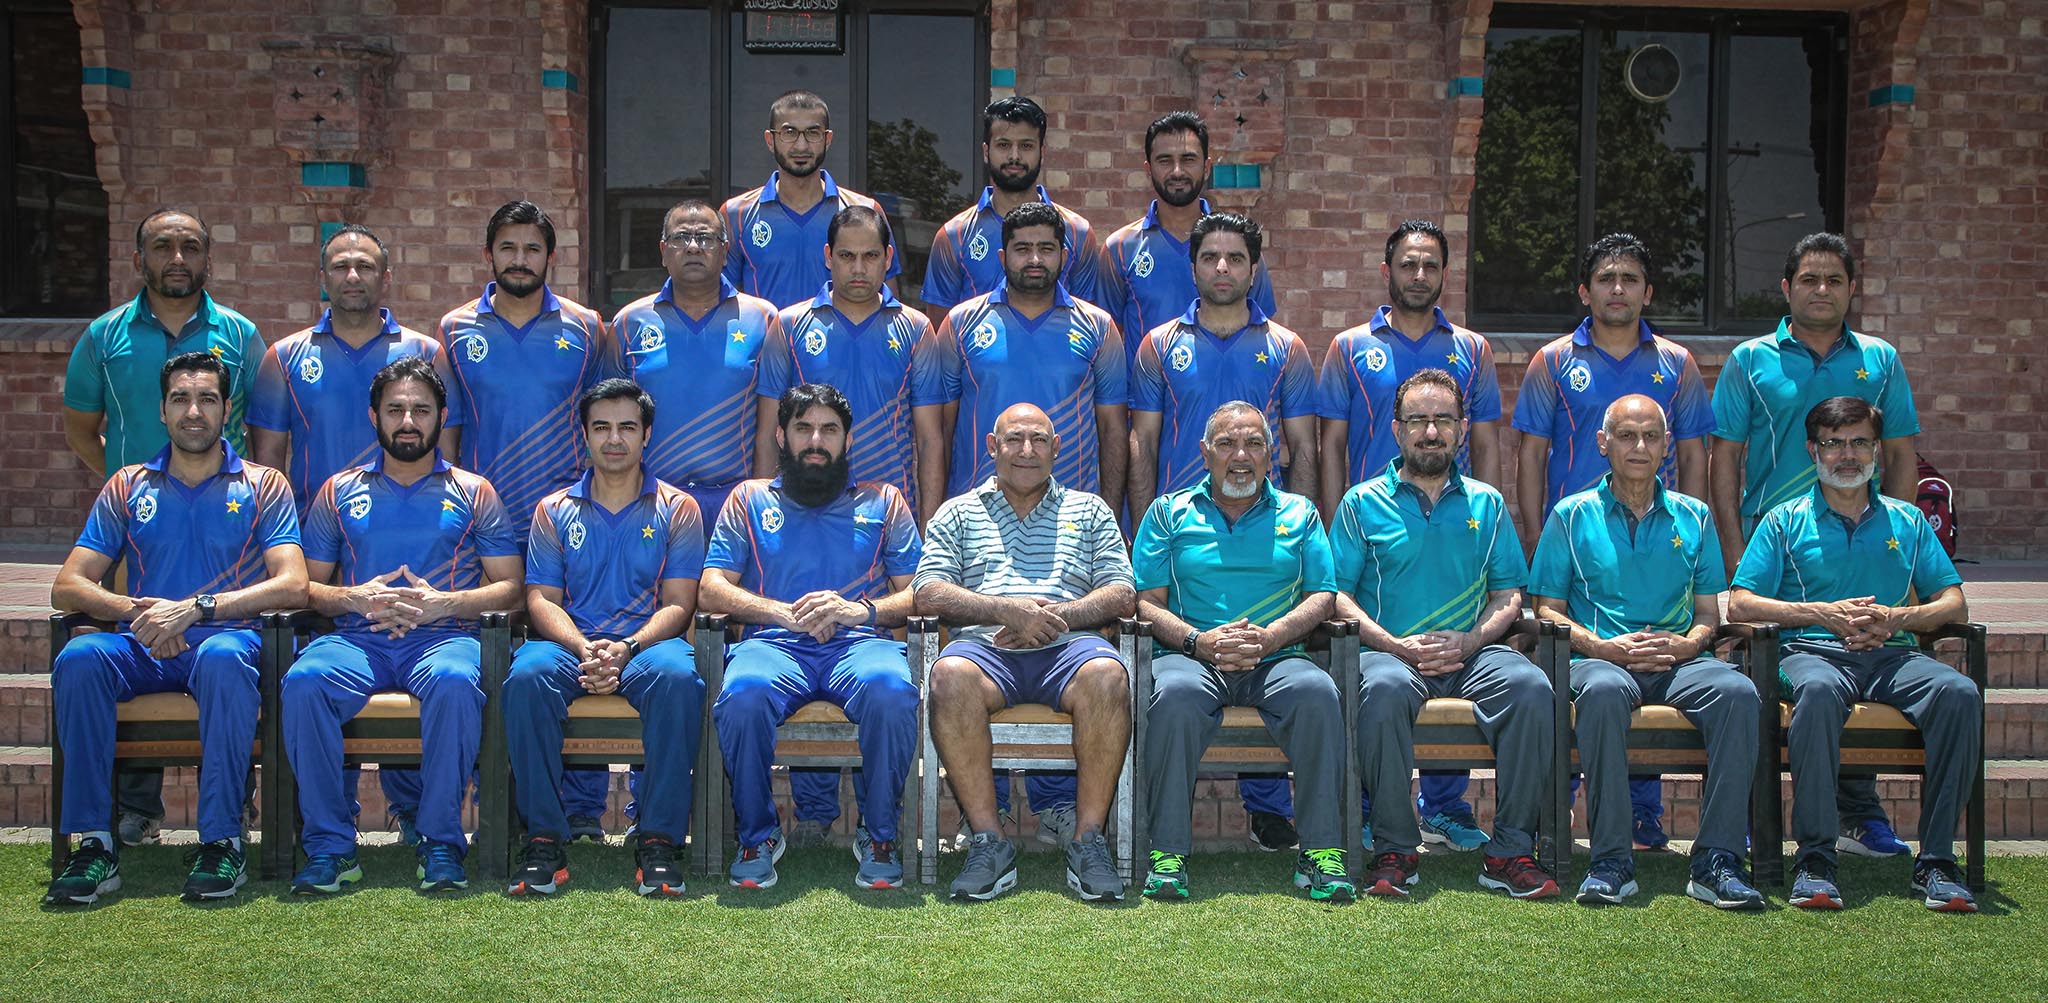 PCB Level 2 Coach Education Course concludes at the NCA Press Release